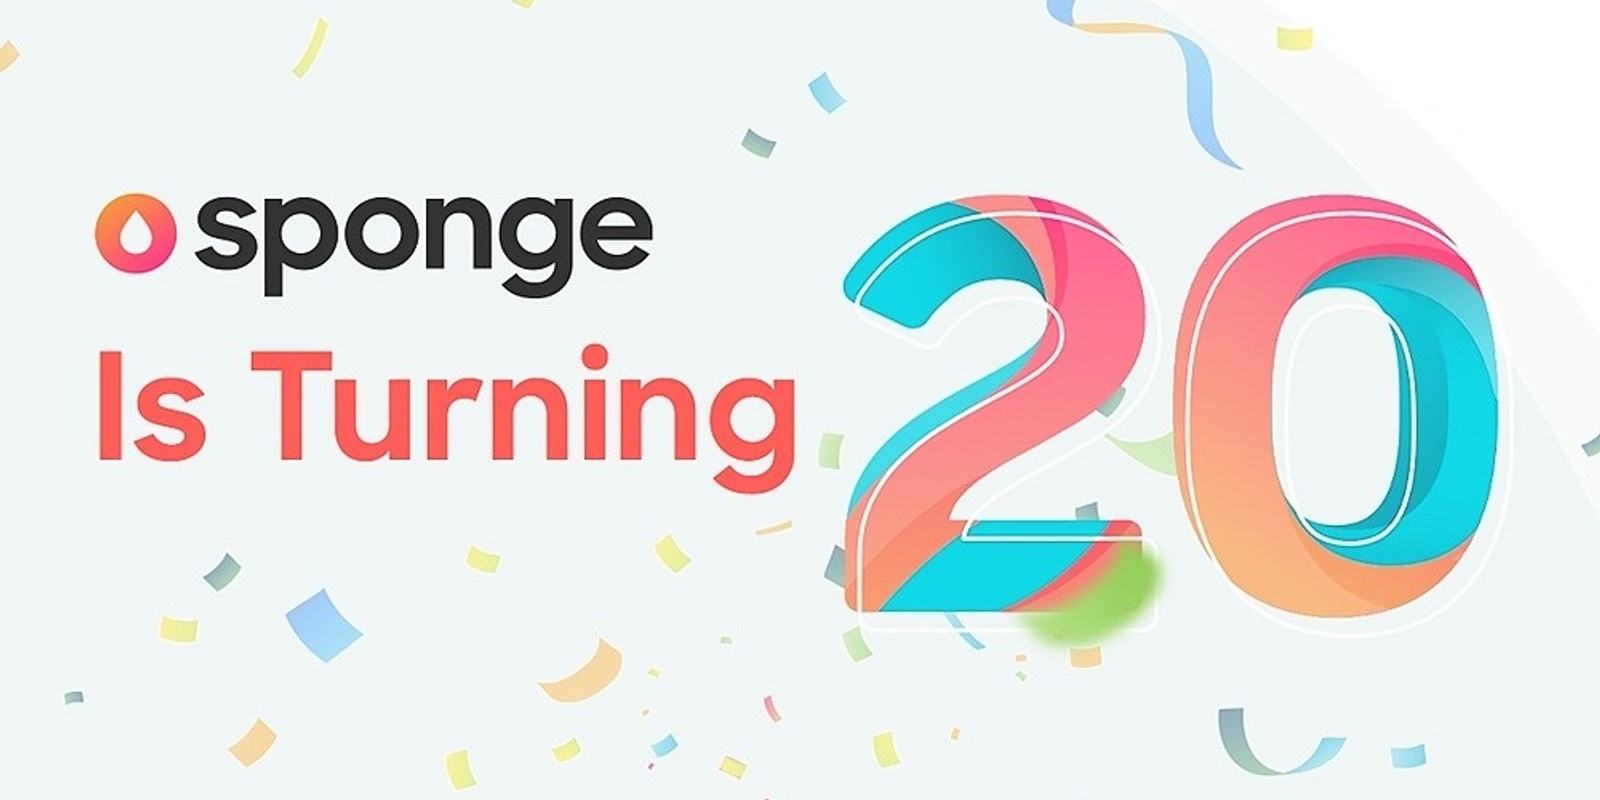 Banner image for Spongiversary 20